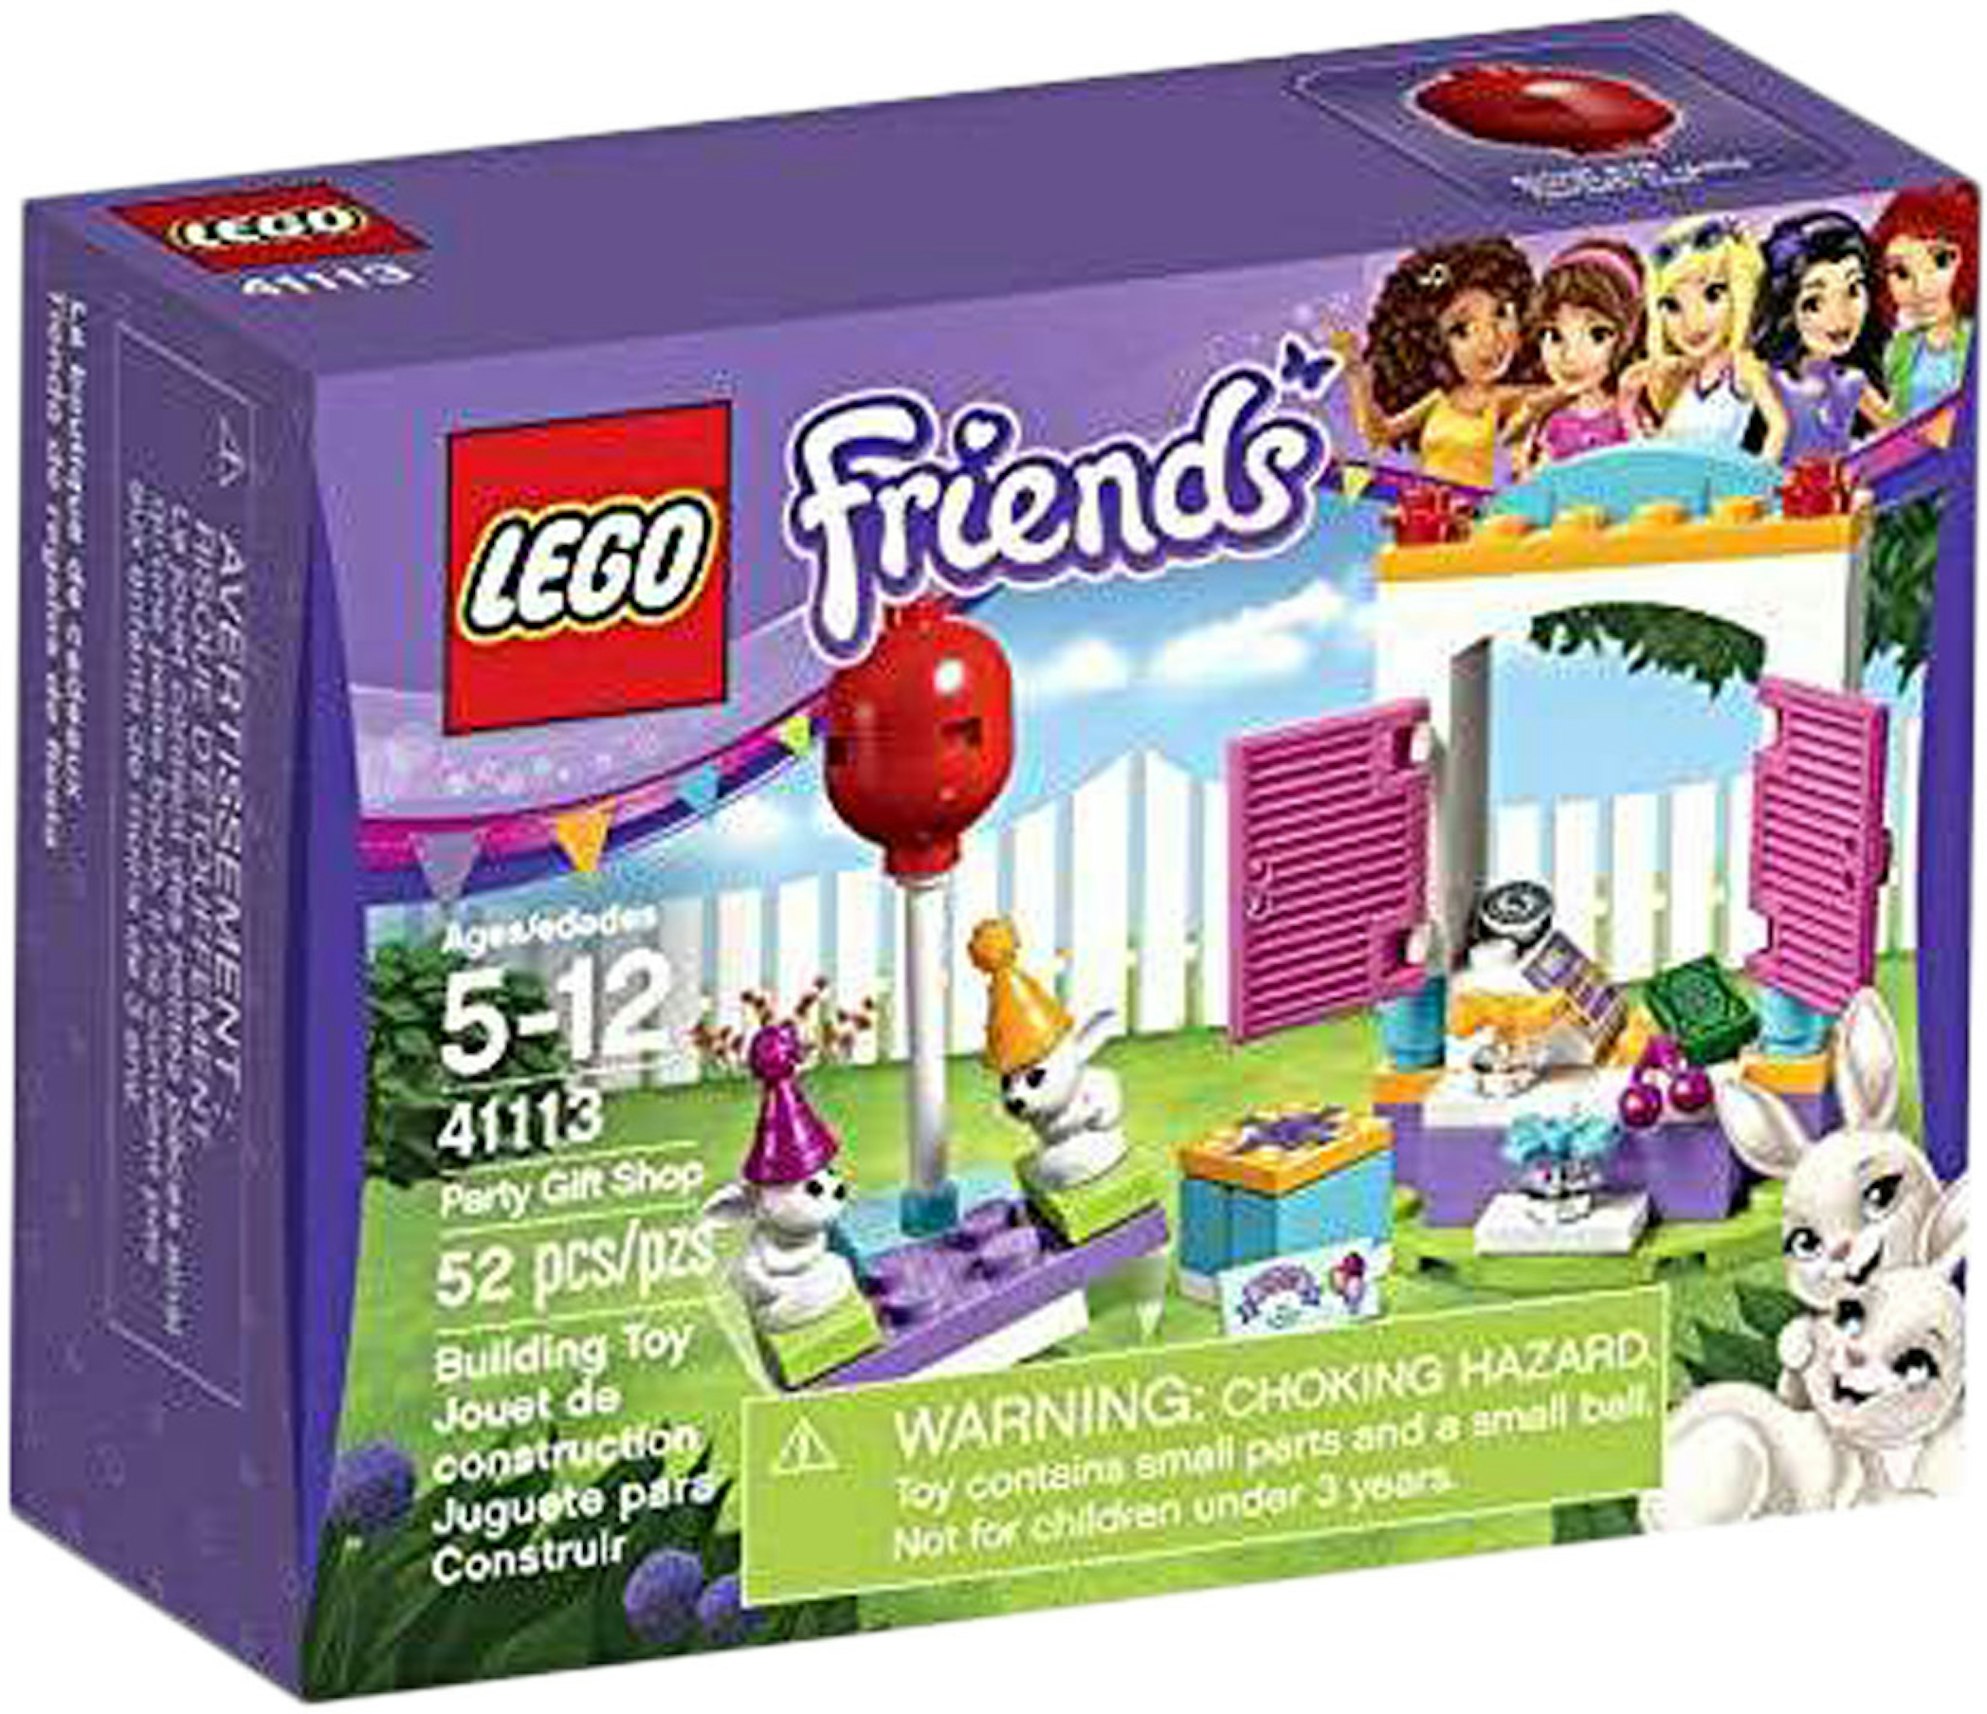 LEGO Friends Party Gift Set JP